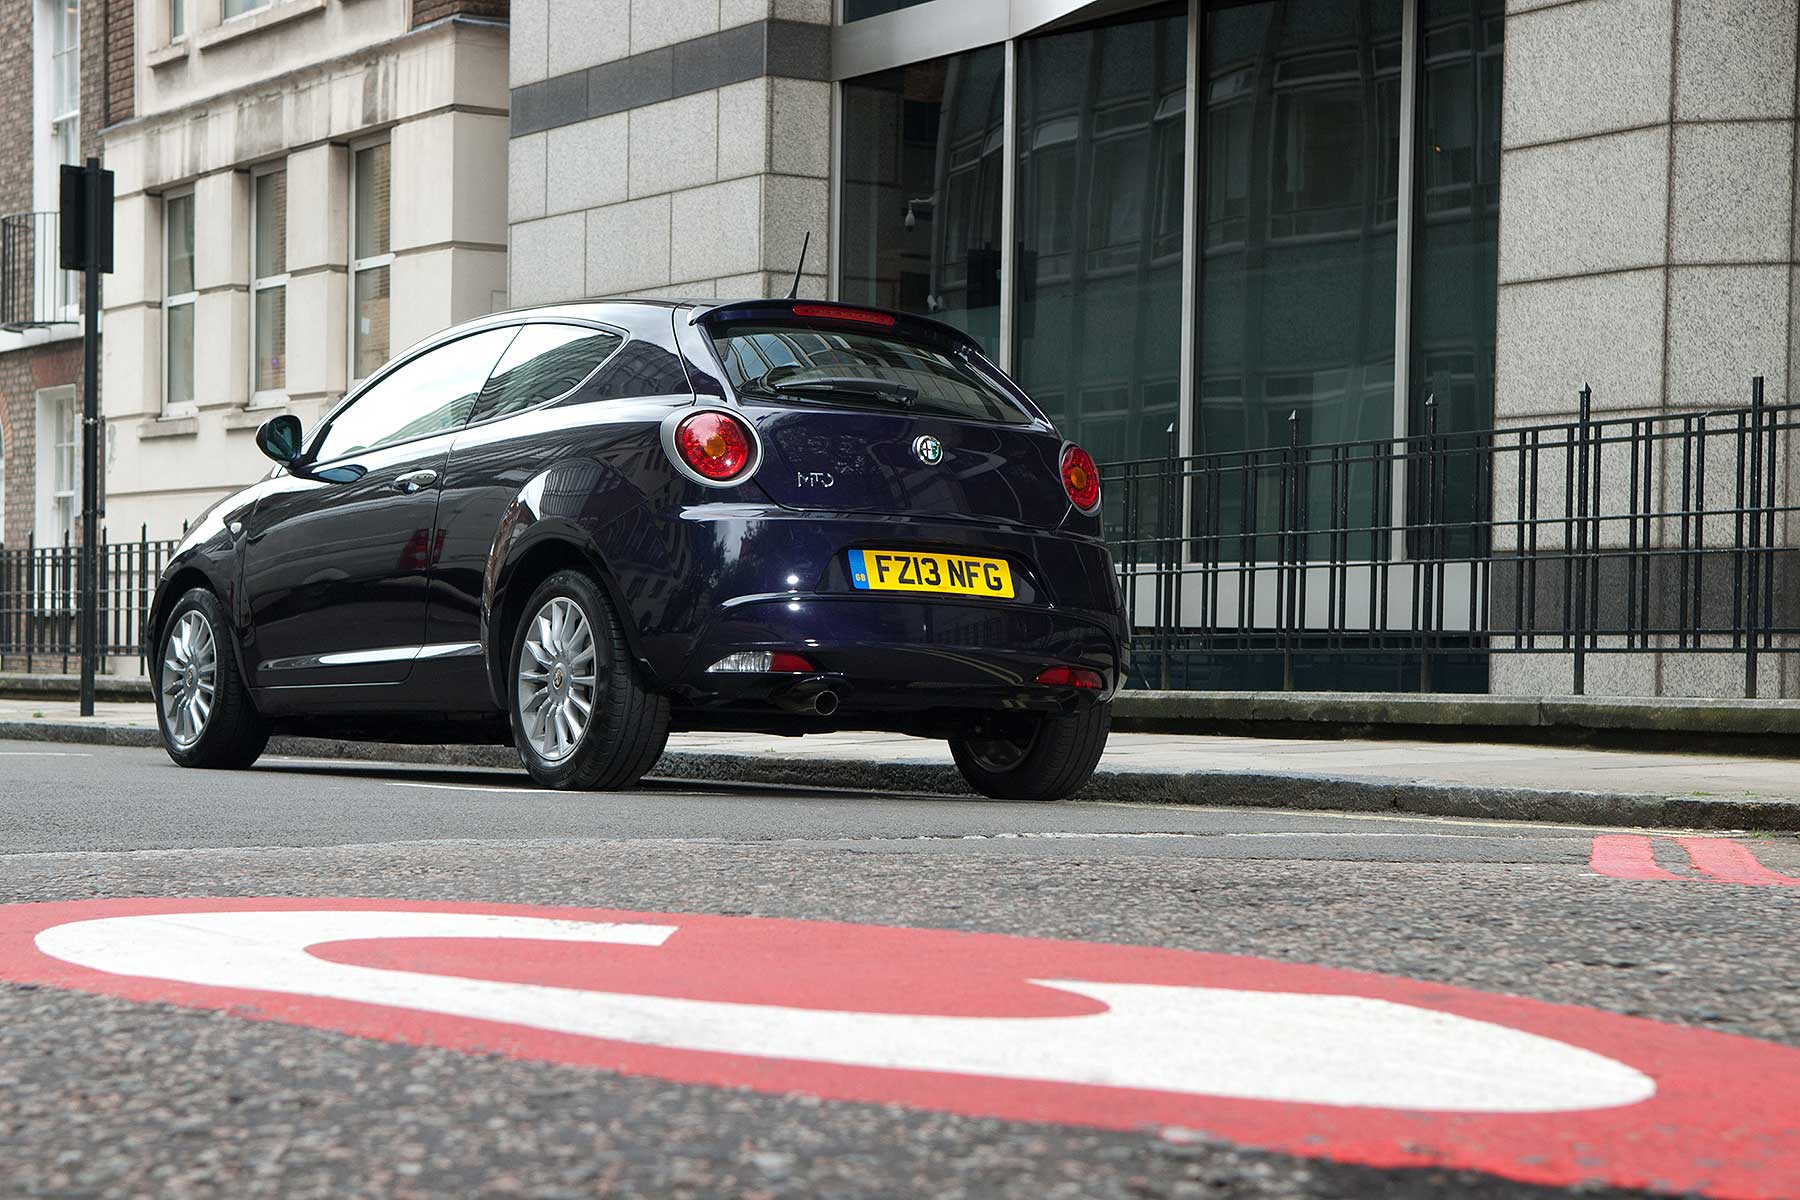 Alfa Romeo Mito within the London Congestion Charge zone